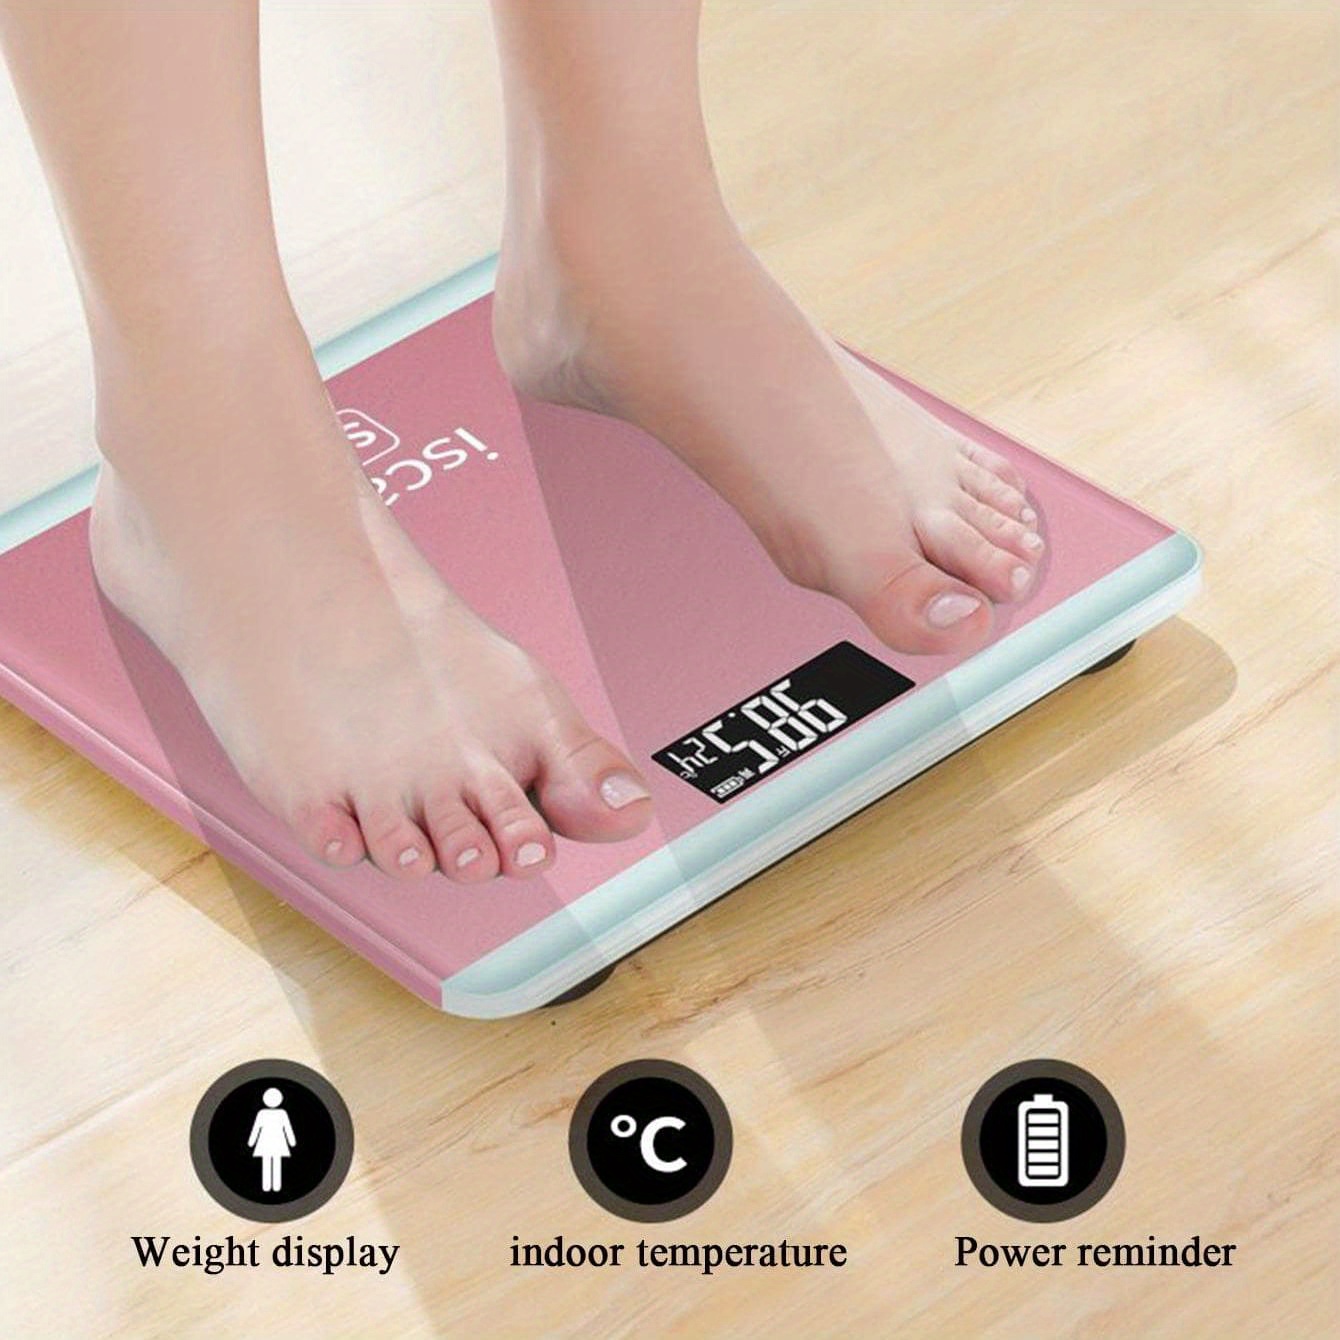 Weight Scale, Bathroom Weight Scale, Smart Health Scale, Pink